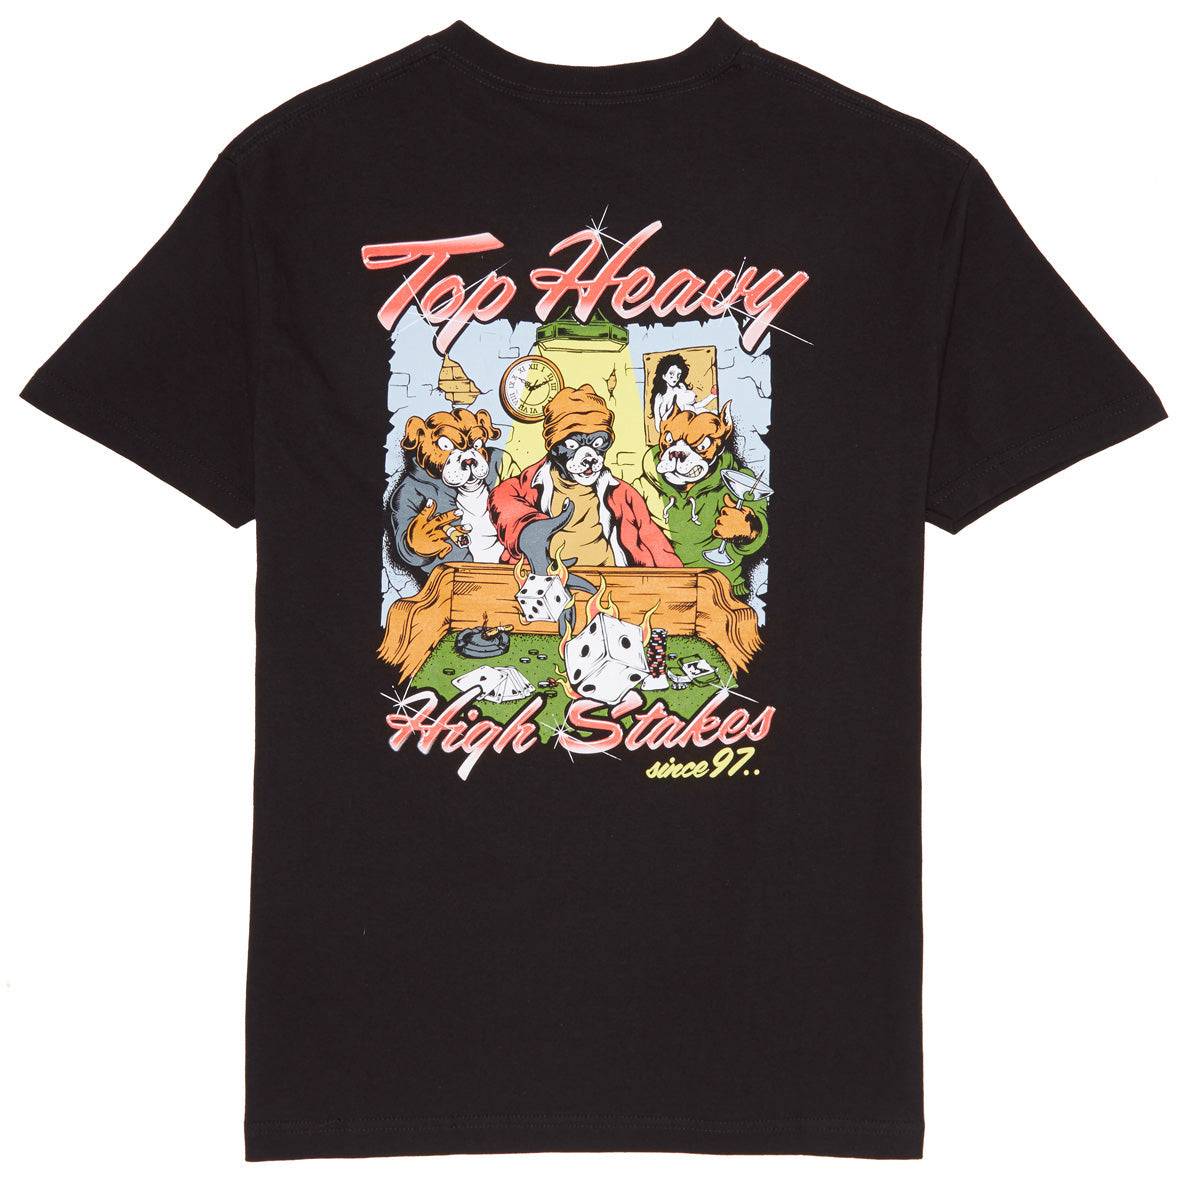 Top Heavy High Stakes T-Shirt - Black image 1